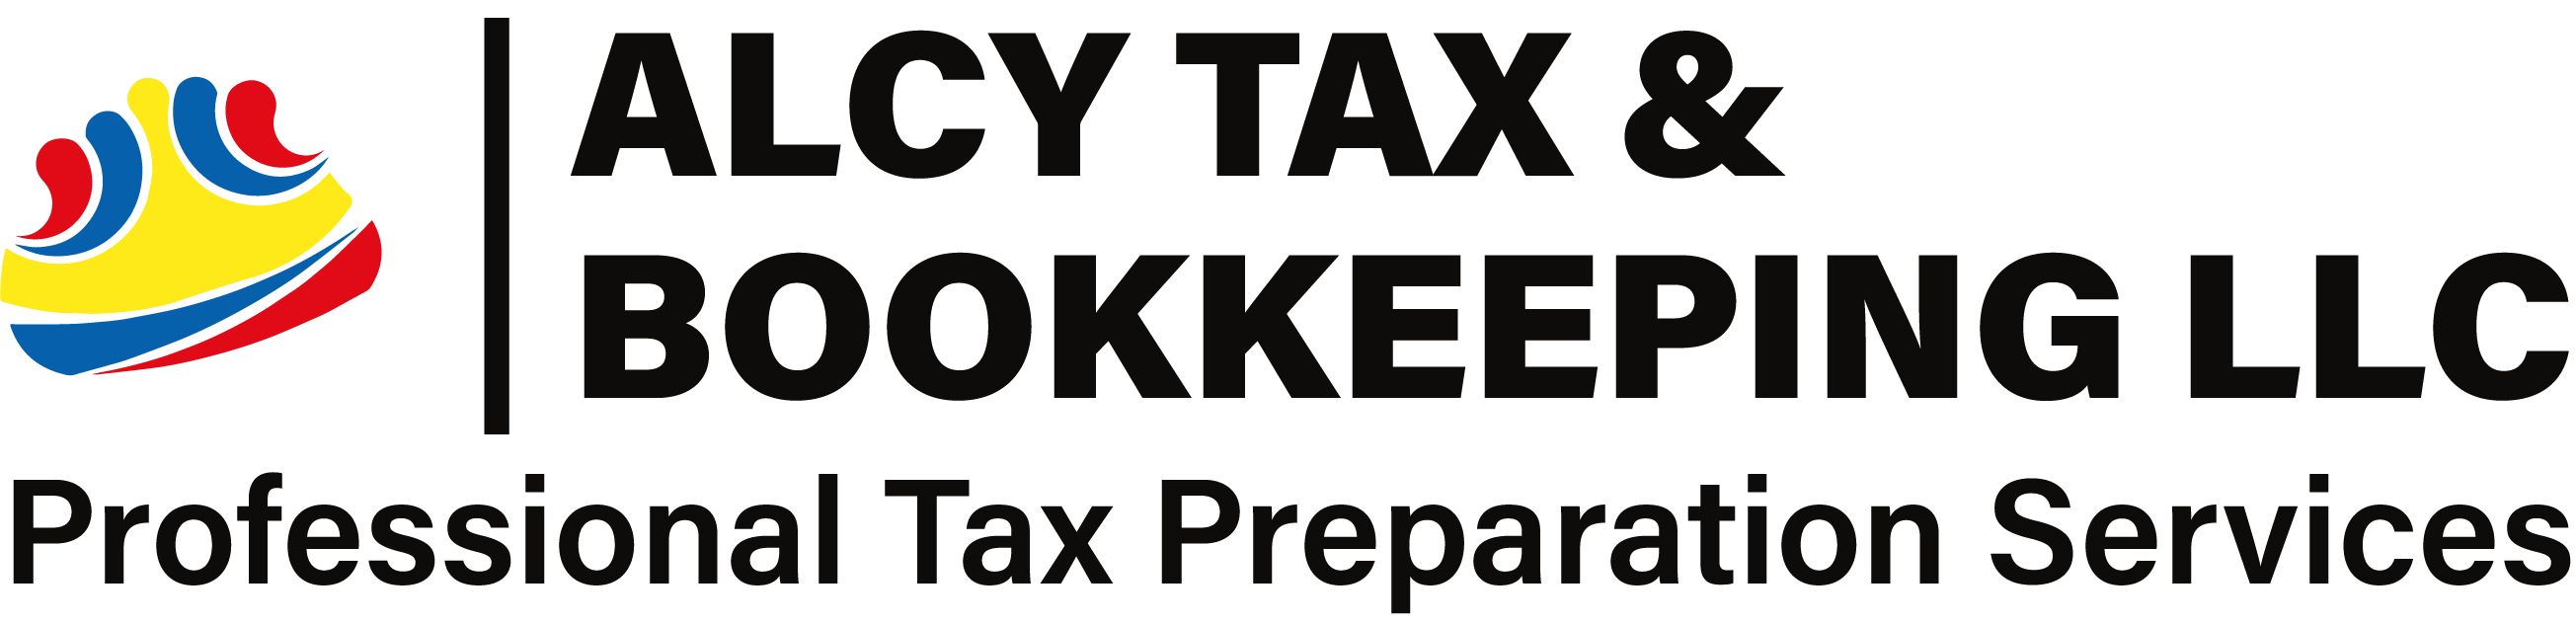 ALCY TAX AND BOOKKEEPING LLC